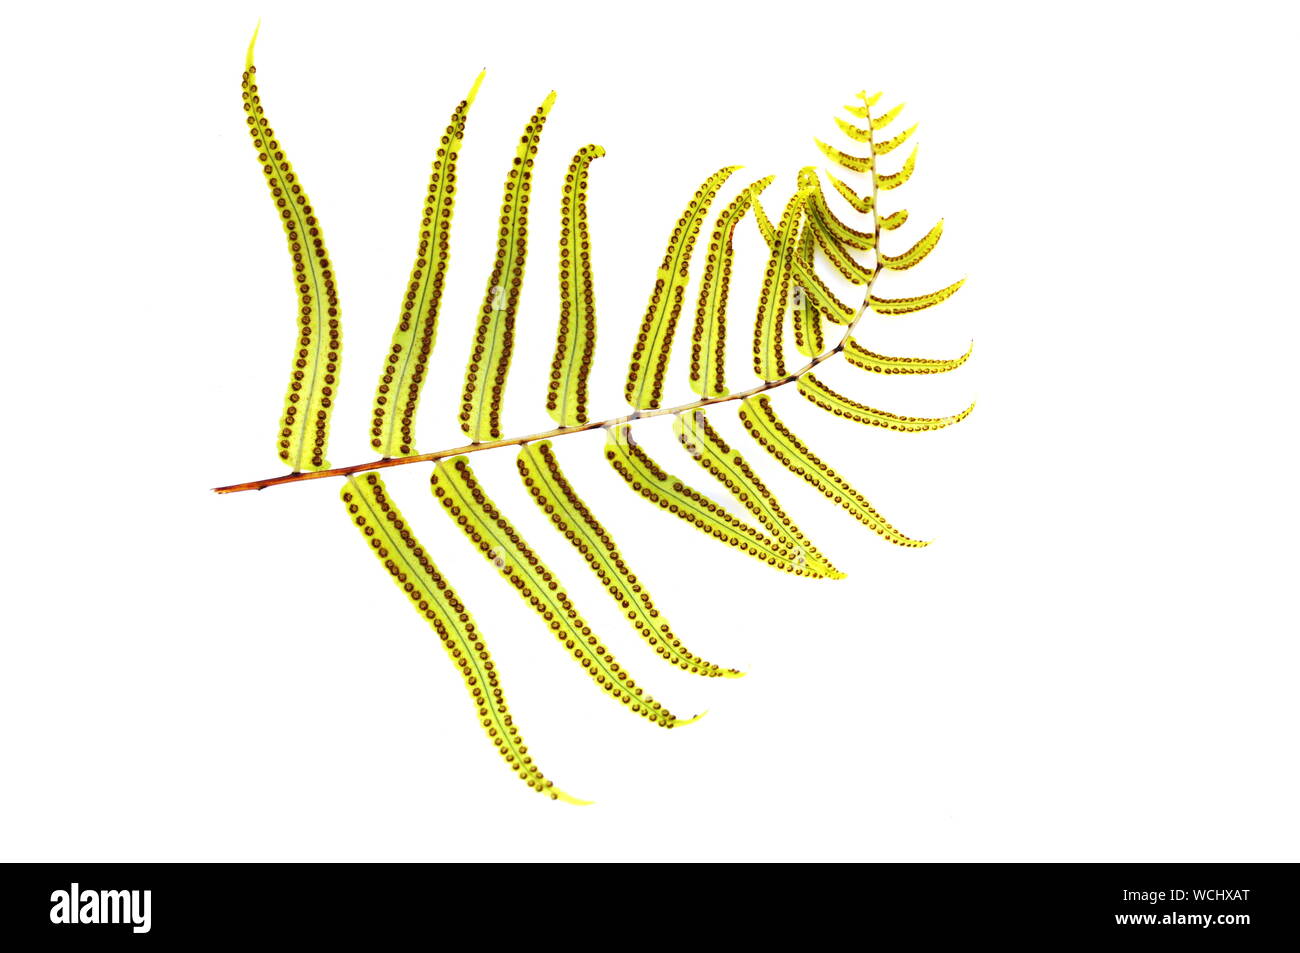 Back side of fern with spores on white background Stock Photo